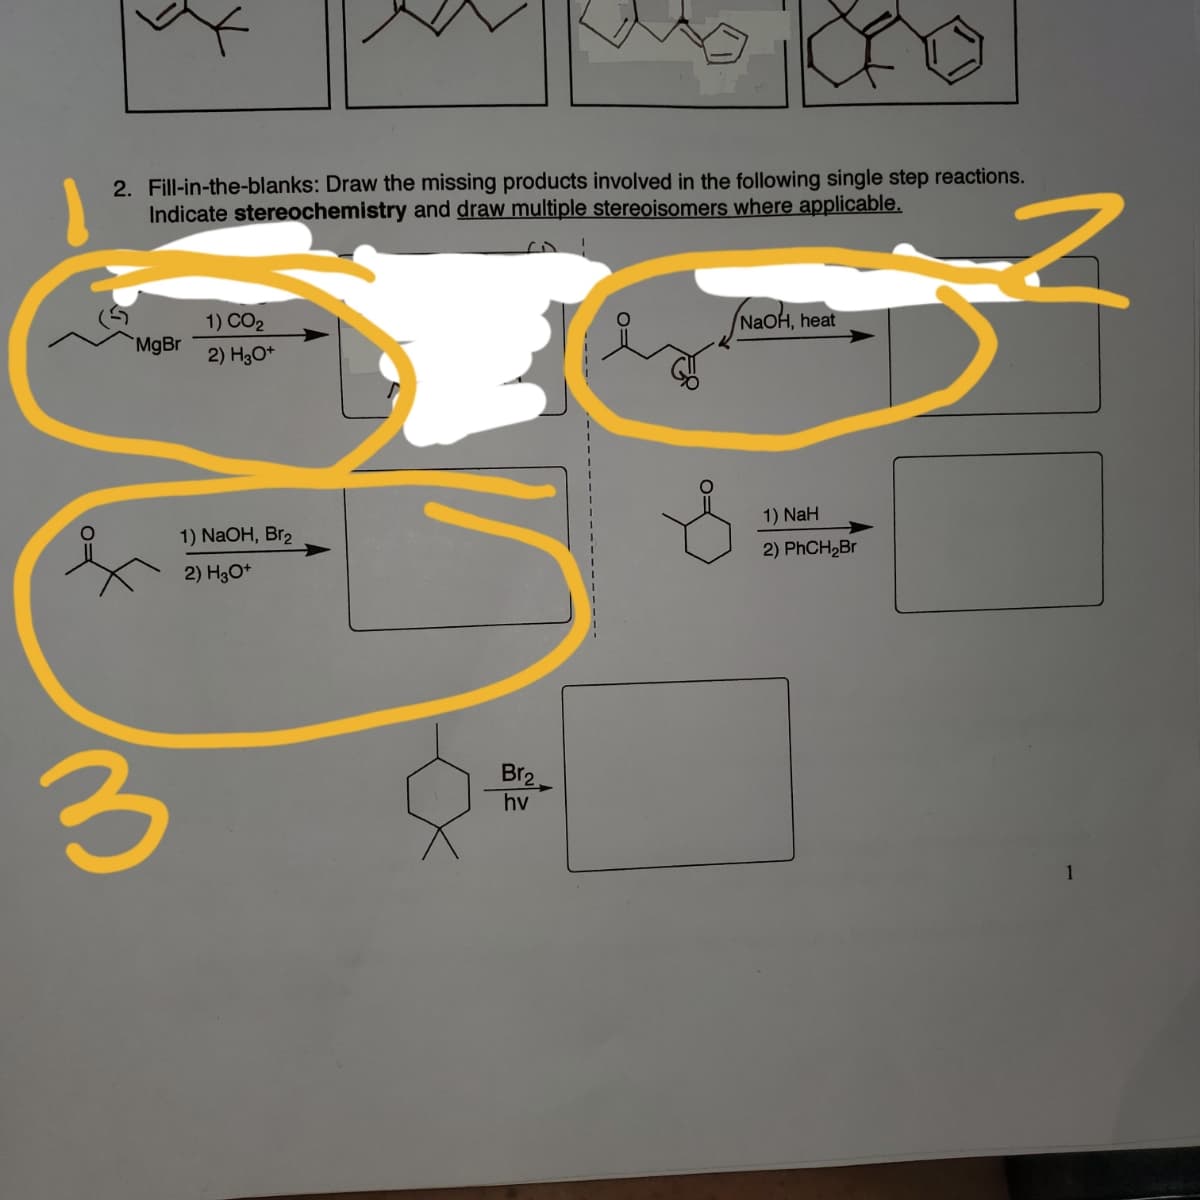 2. Fill-in-the-blanks: Draw the missing products involved in the following single step reactions.
Indicate stereochemistry and draw multiple stereoisomers where applicable.
1) CO2
NaOH, heat
MgBr
2) H3O*
1) NaH
1) NaOH, Br2
2) PhCH2Br
2) H3O*
Br2
hv
1
